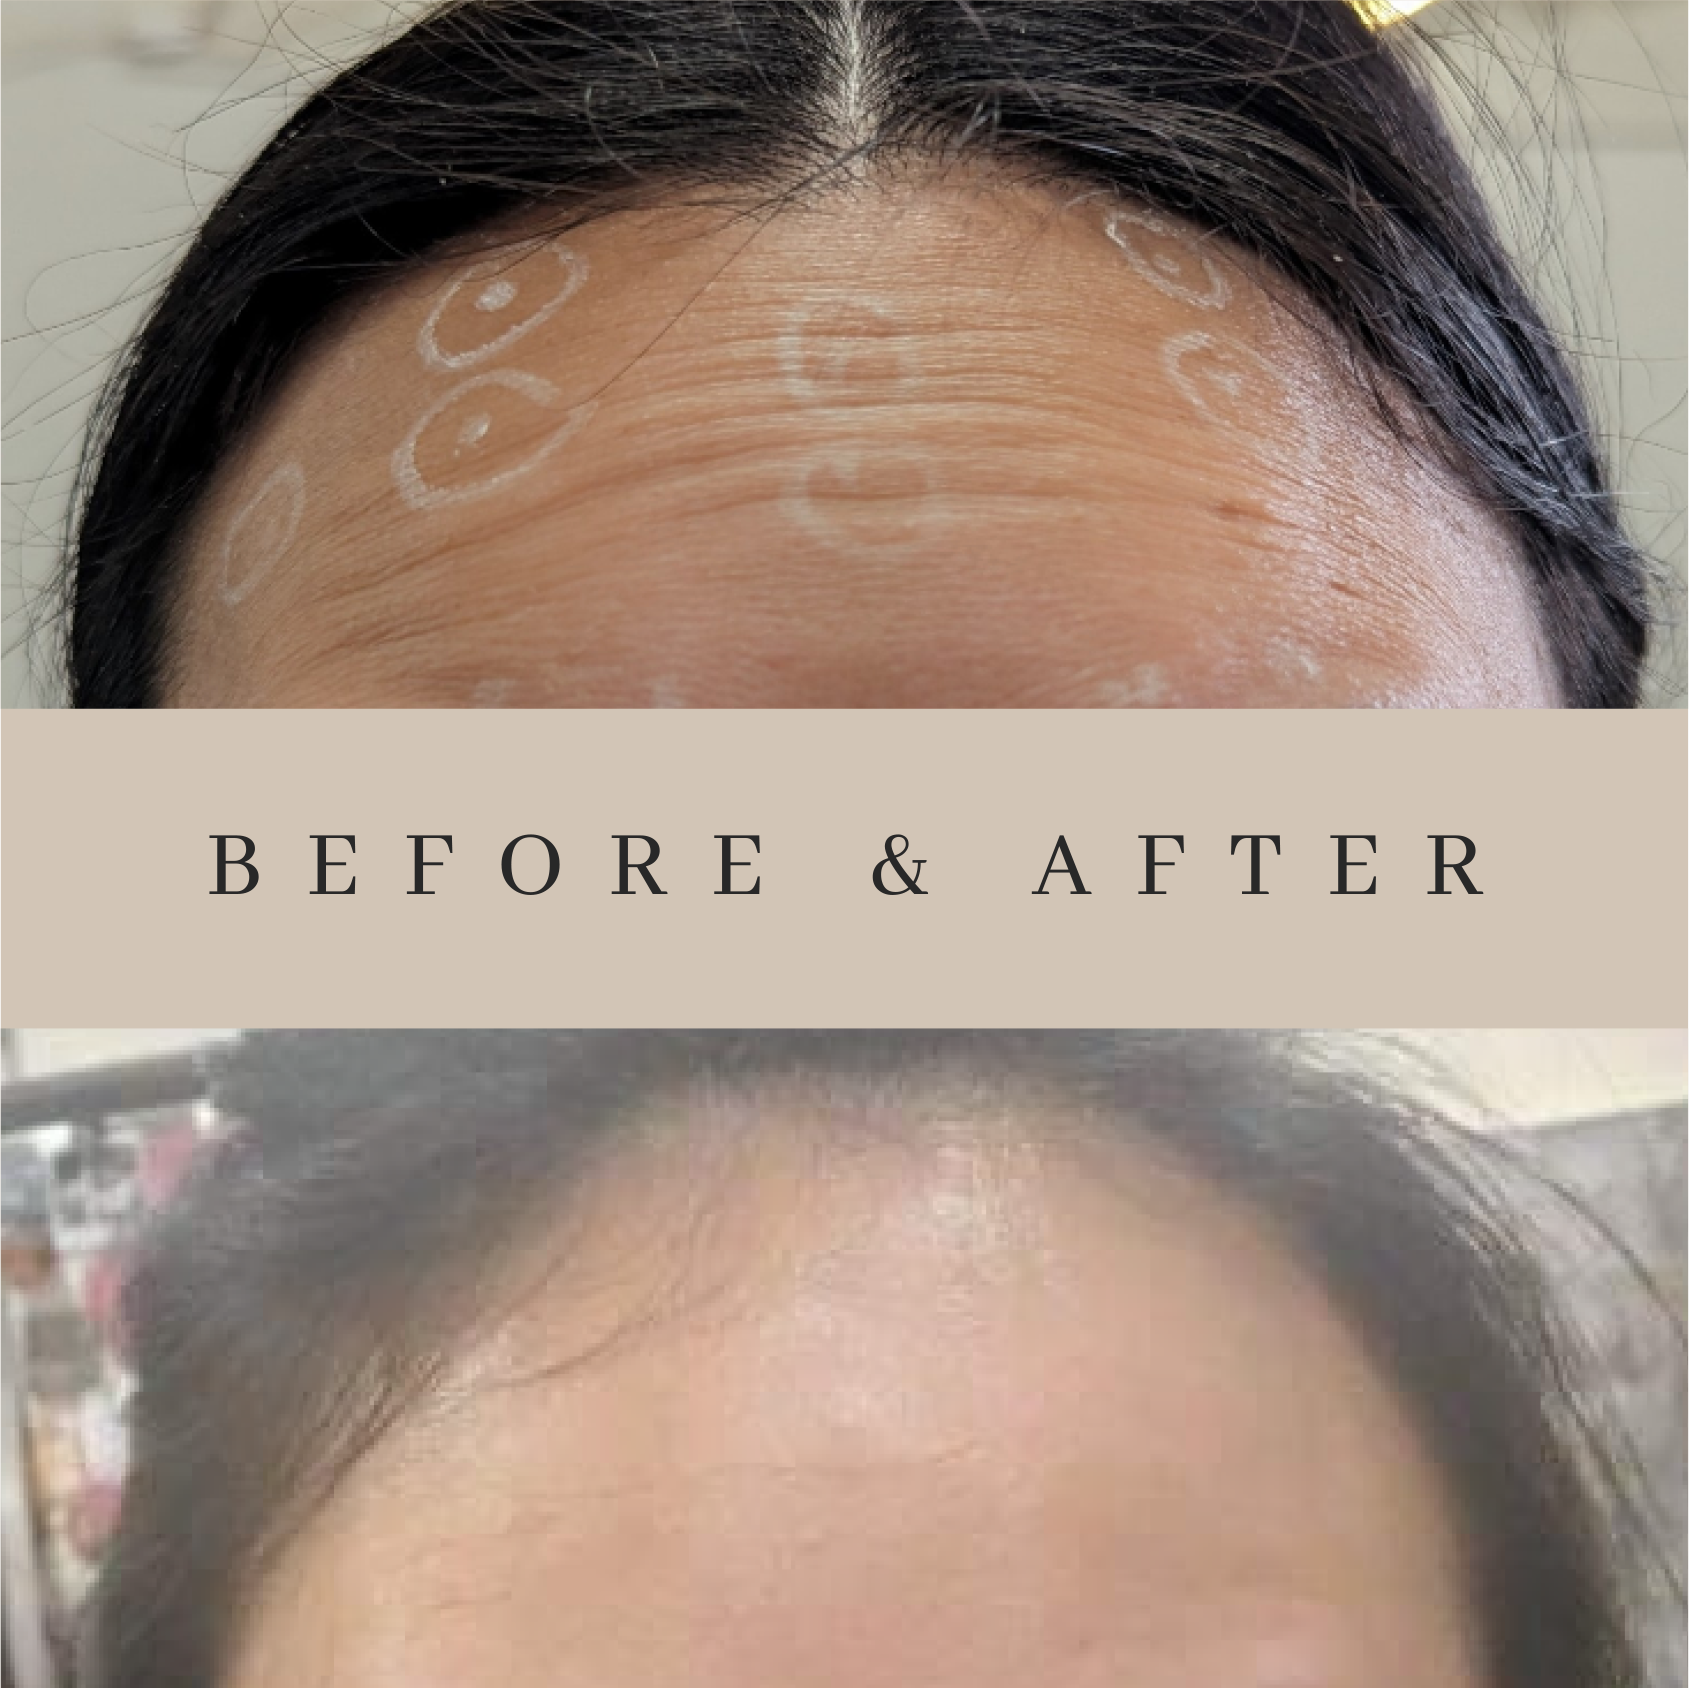 A before and after photo of a woman 's forehead